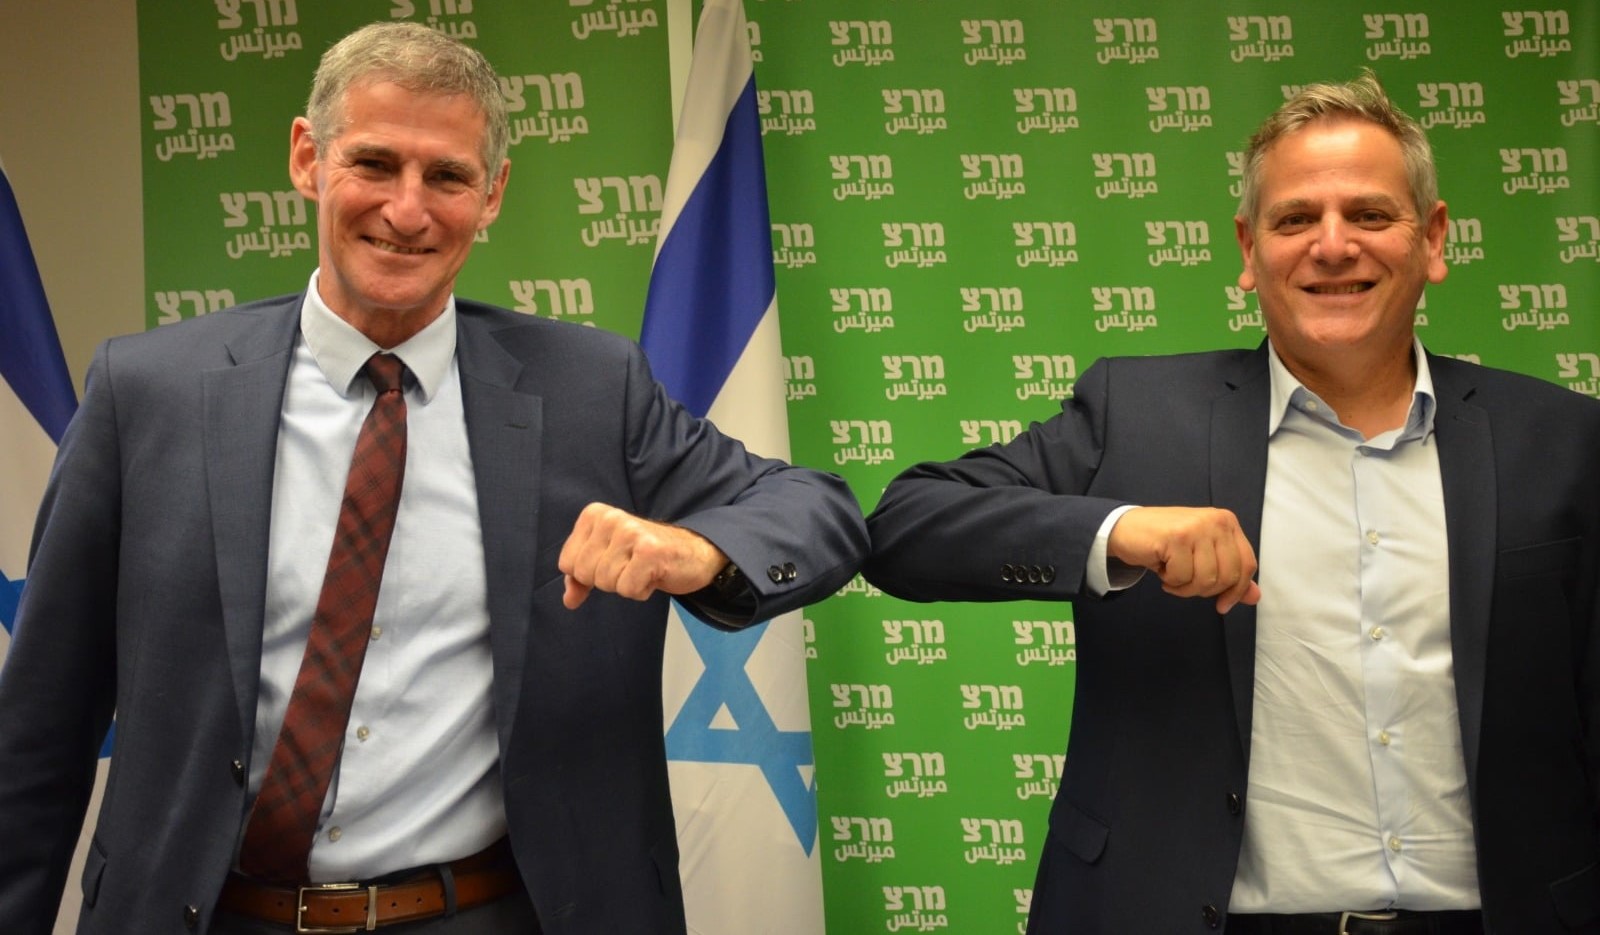 Meretz deputy minister and former lawmaker Yair Golan (left) with the chair of Meretz and Minister of Health Nitzan Horowitz